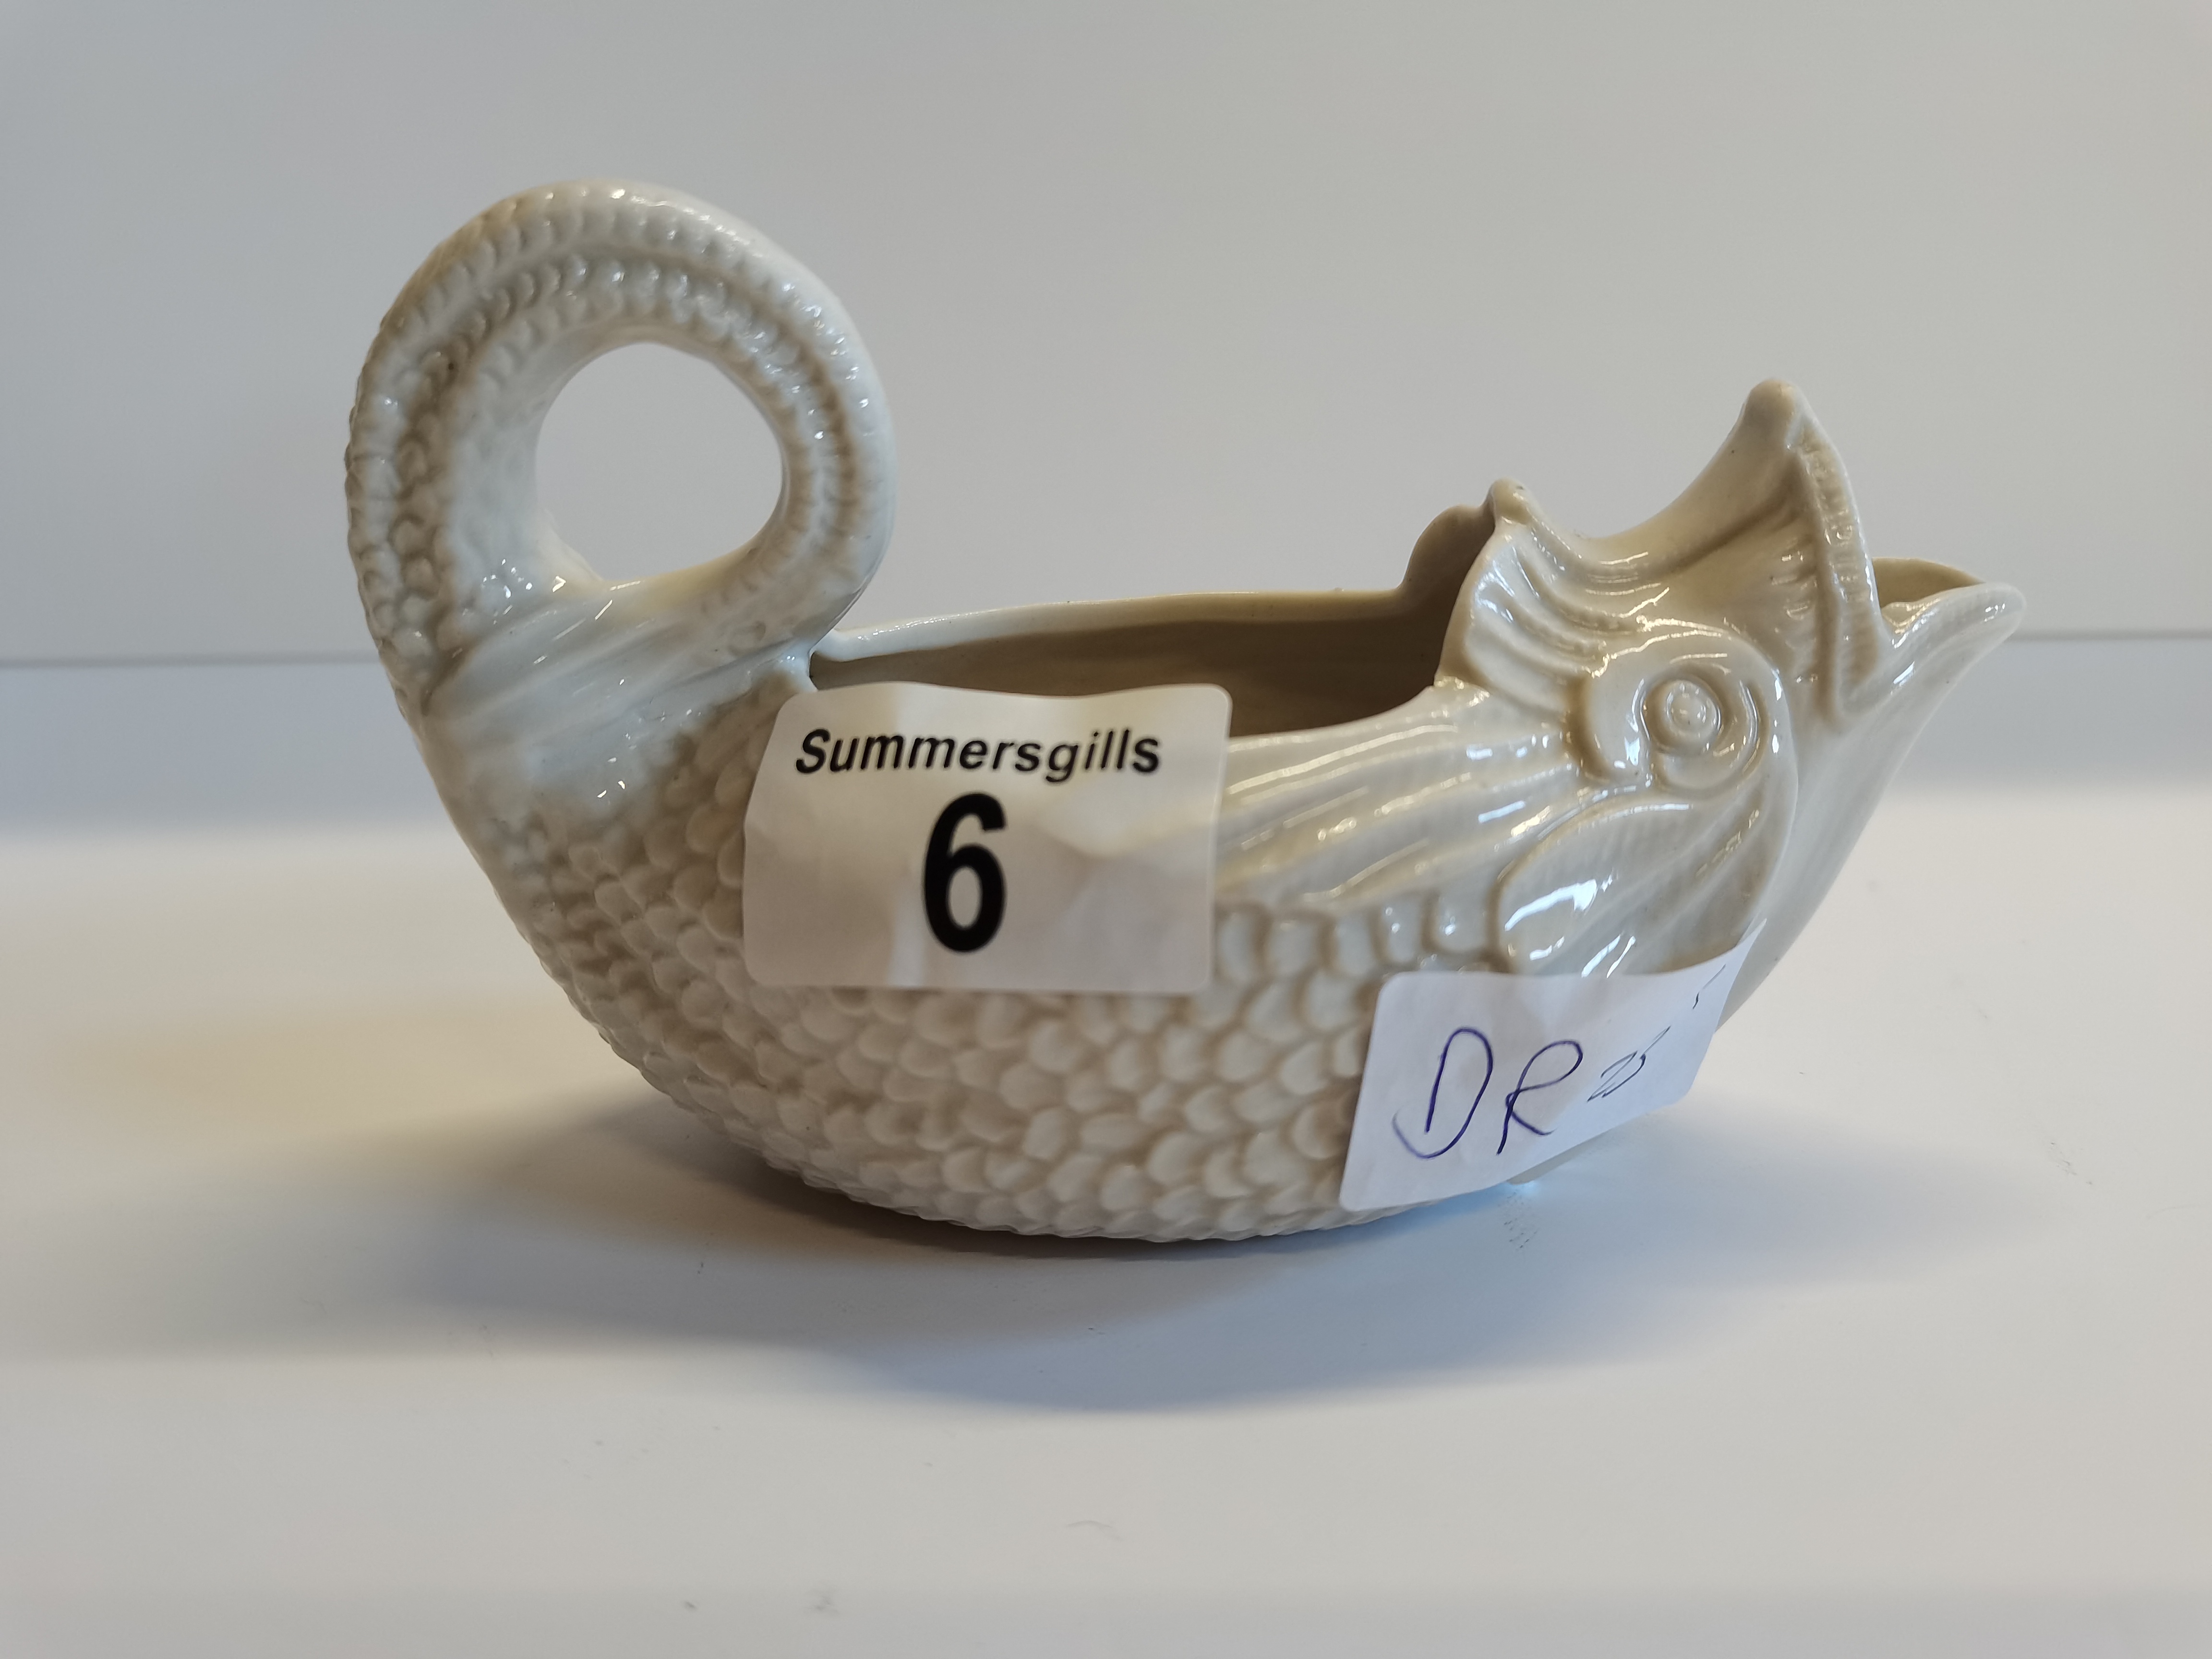 Heppell & Co white glass 1880 pap boat in the form of a fish, used for feeding children and